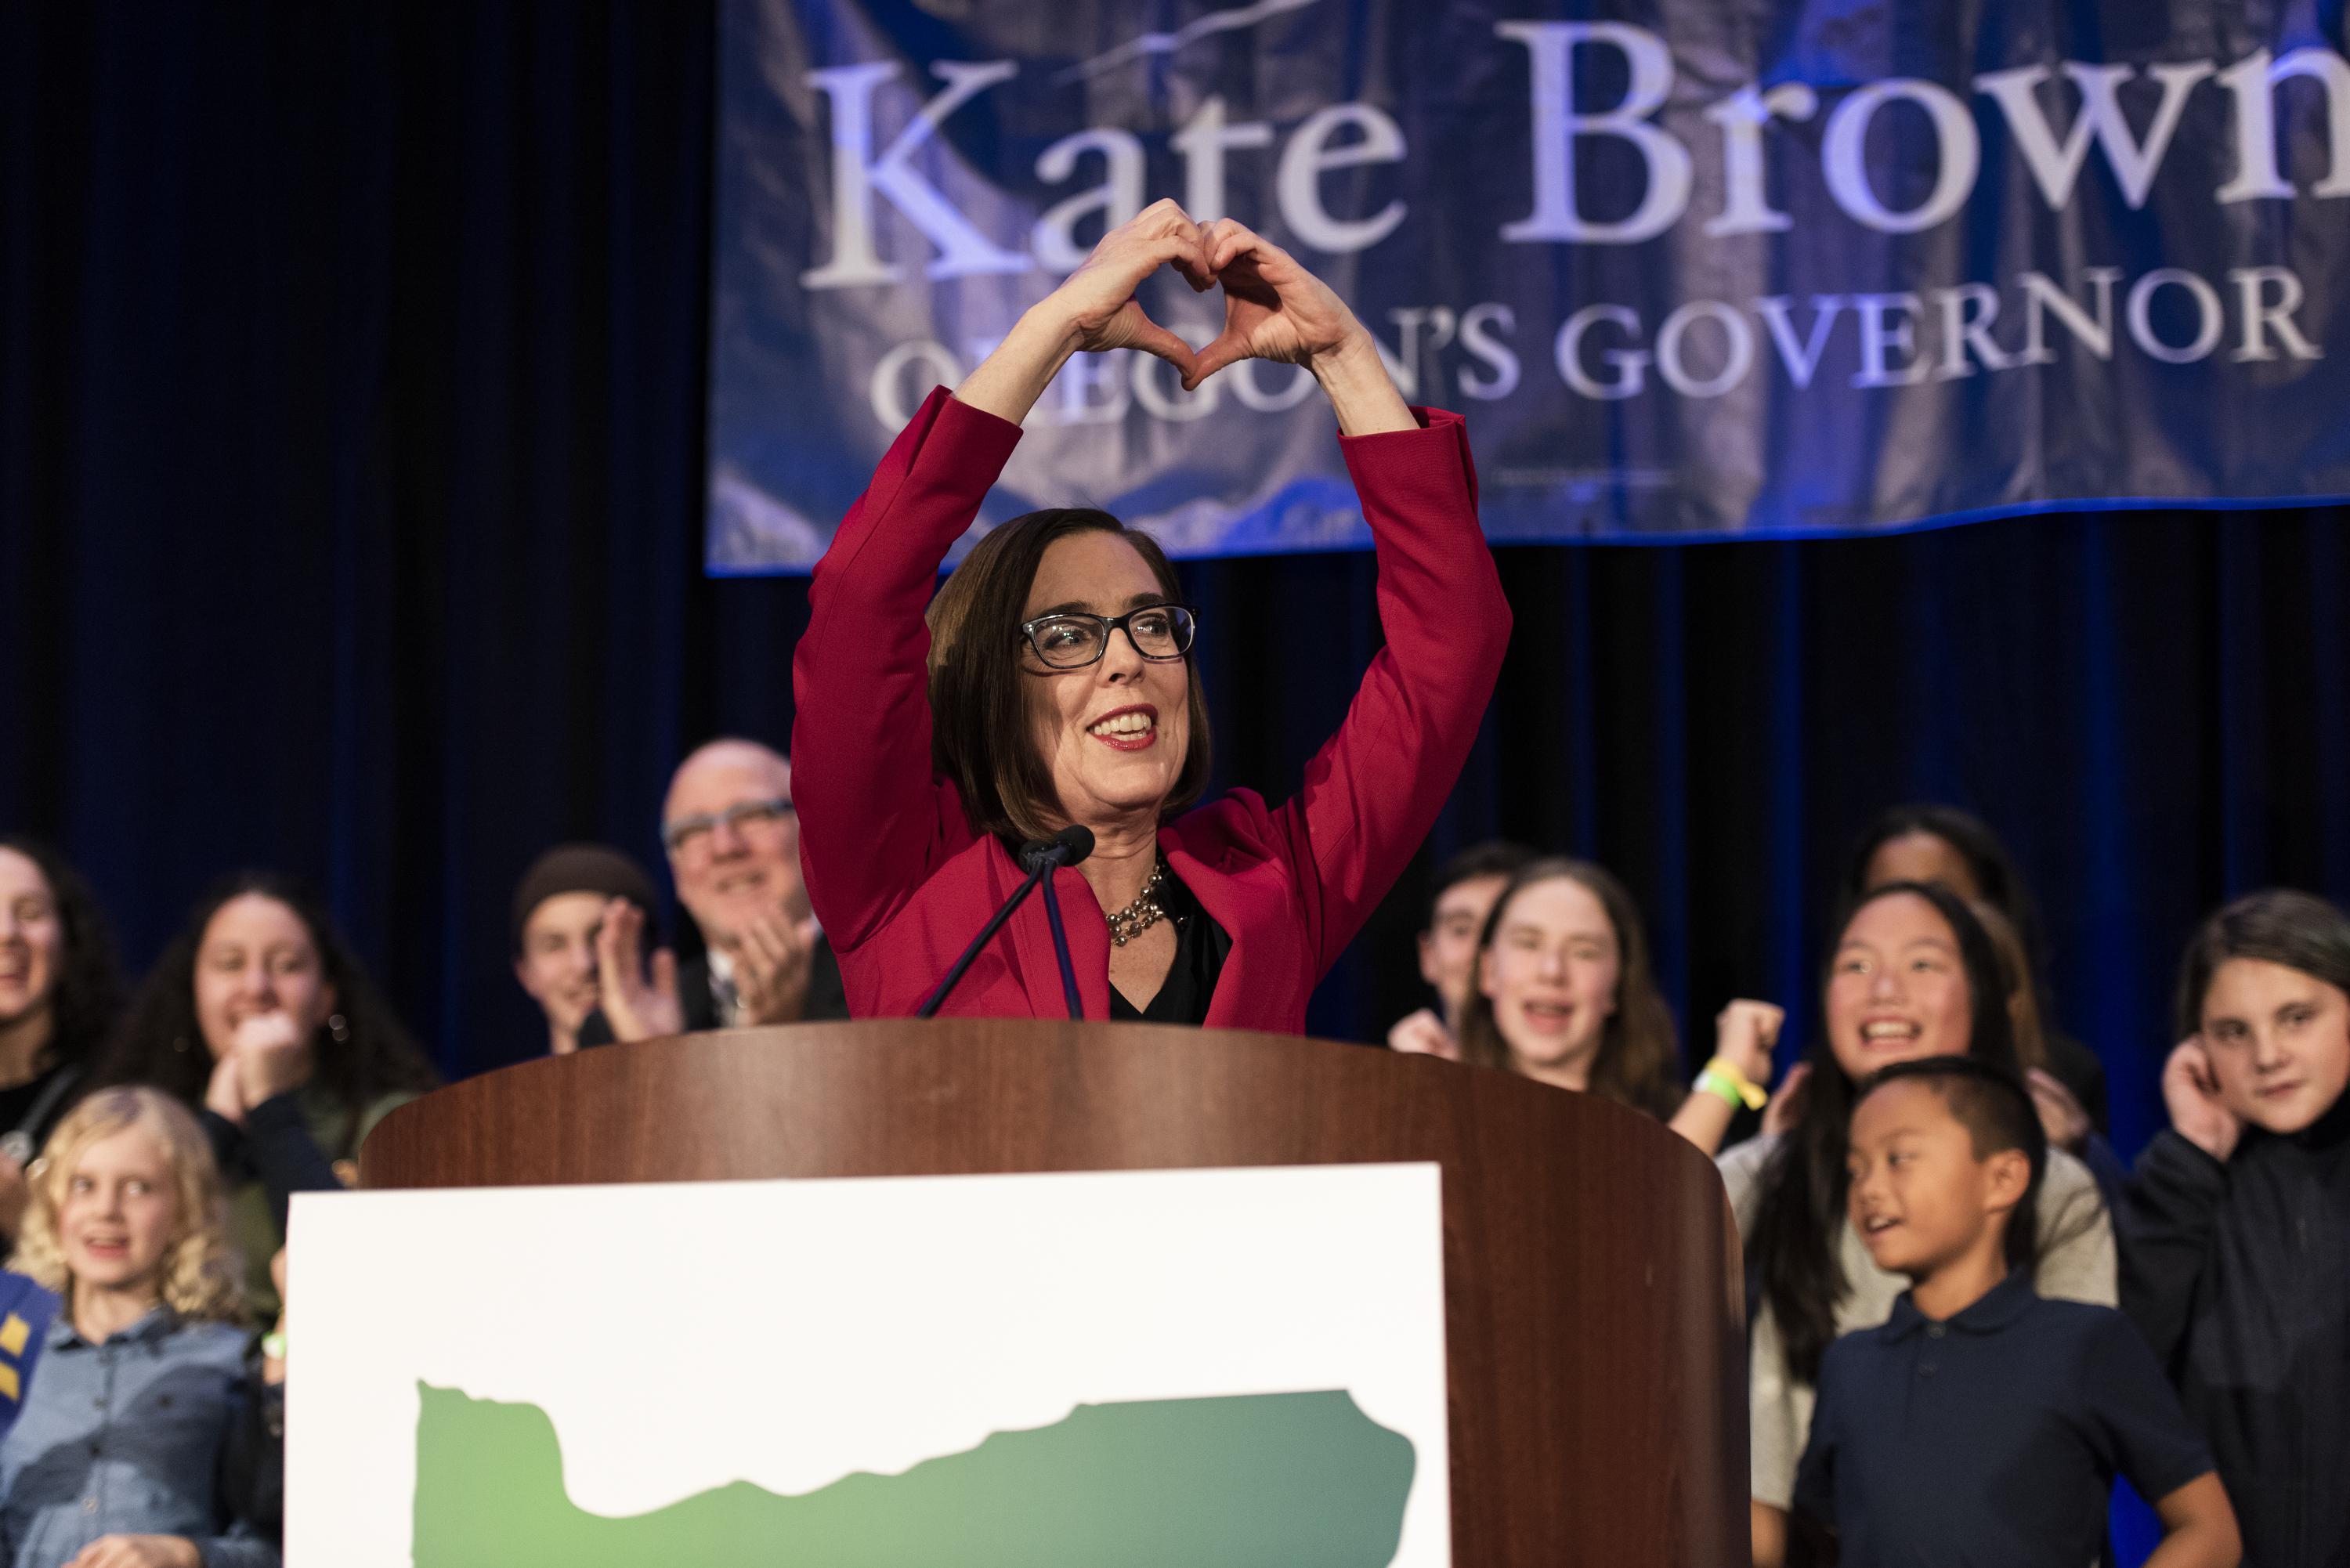 Gov. Kate Brown celebrates her Election Night victory at the Democratic Party of Oregon 2018 election party on Nov. 6, 2018 in Portland, Oregon.